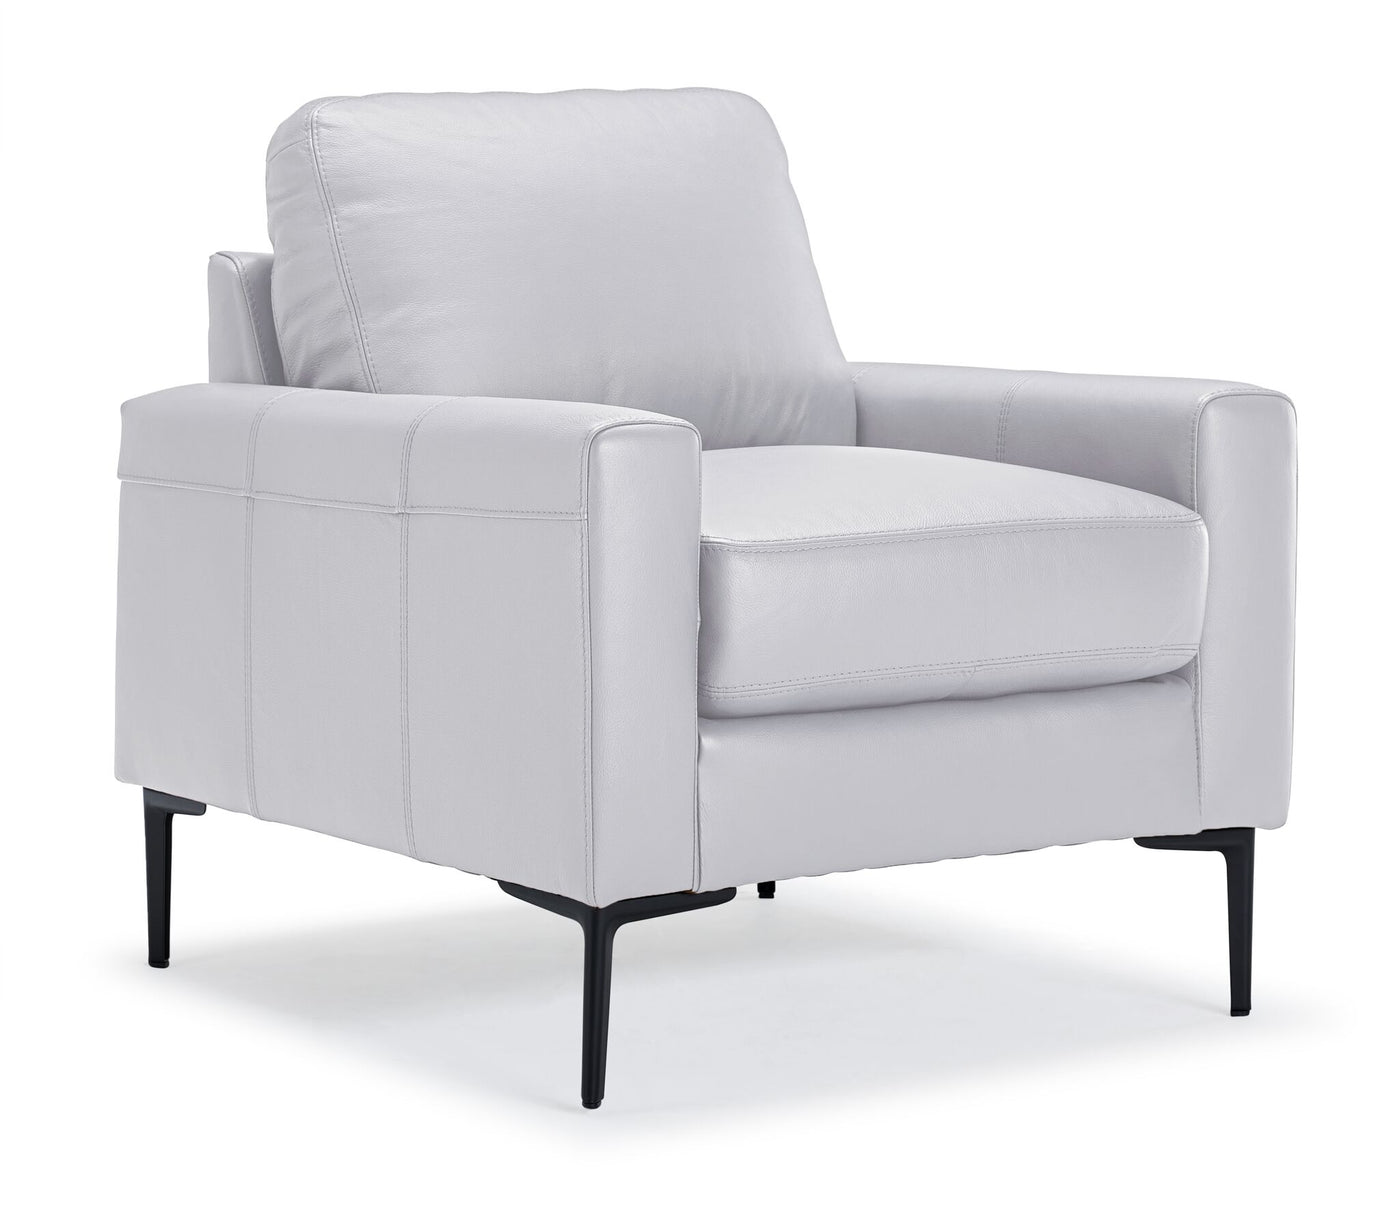 Chito Leather Sofa, Loveseat and Chair Set - Silver Grey